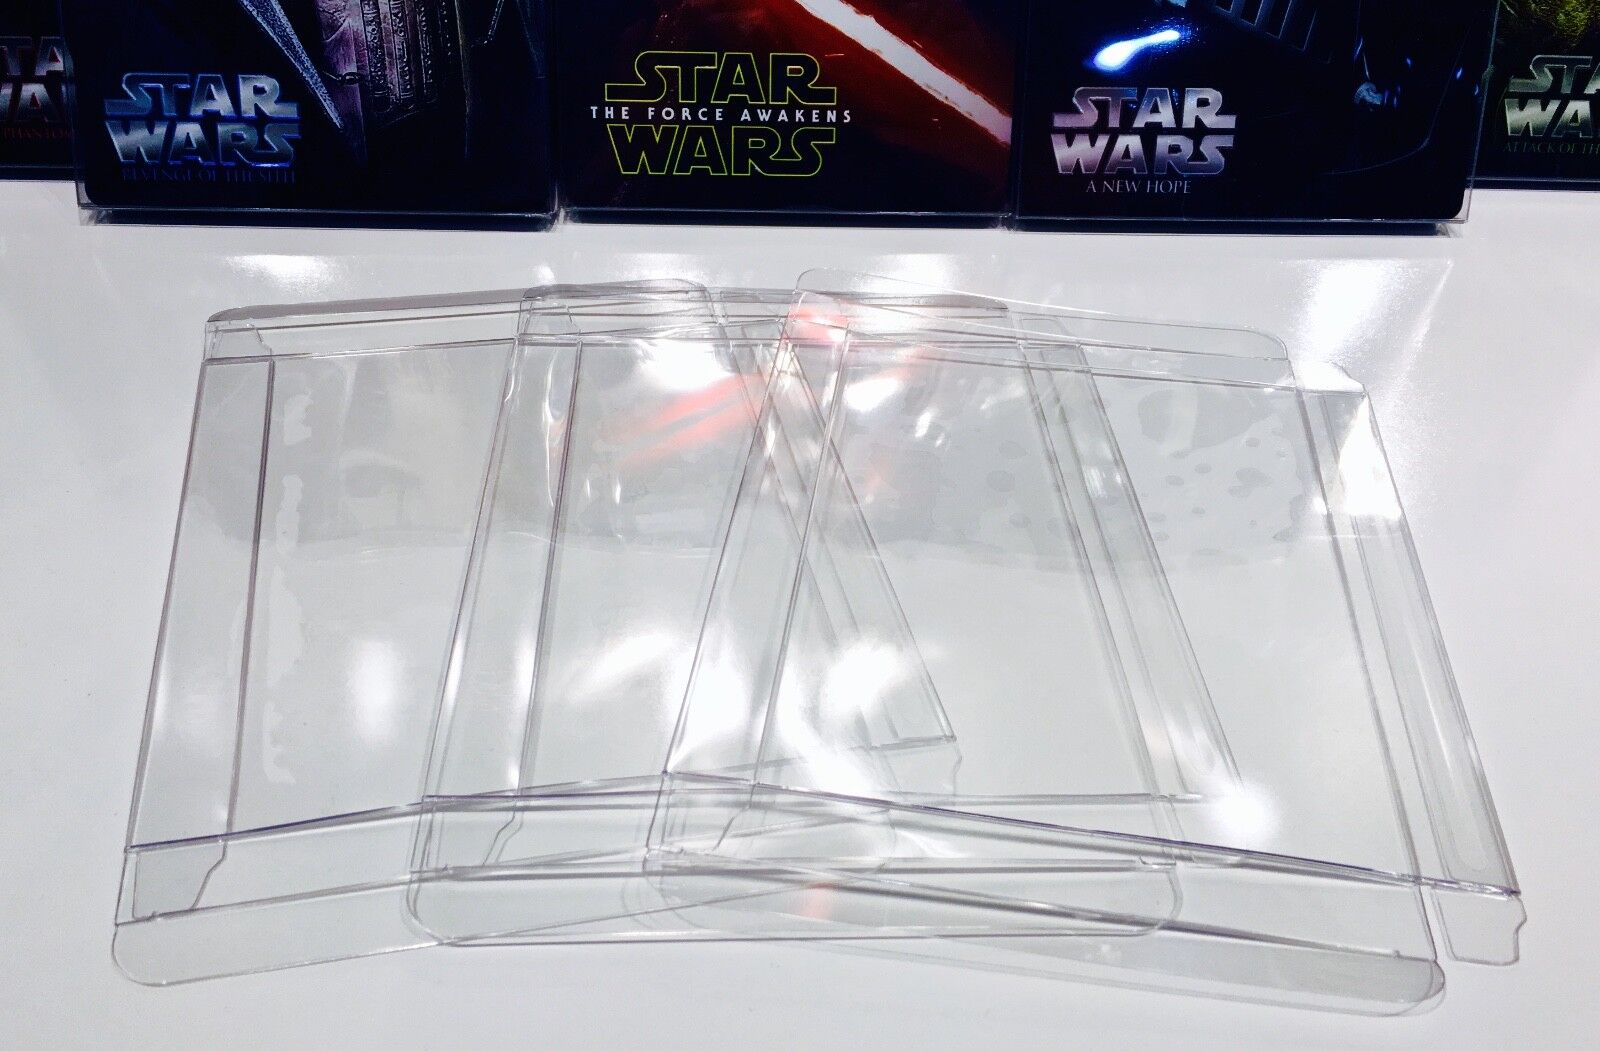 25 STEELBOOK Box Protectors  Protective Sleeves  Clear Plastic Cases / Covers G2